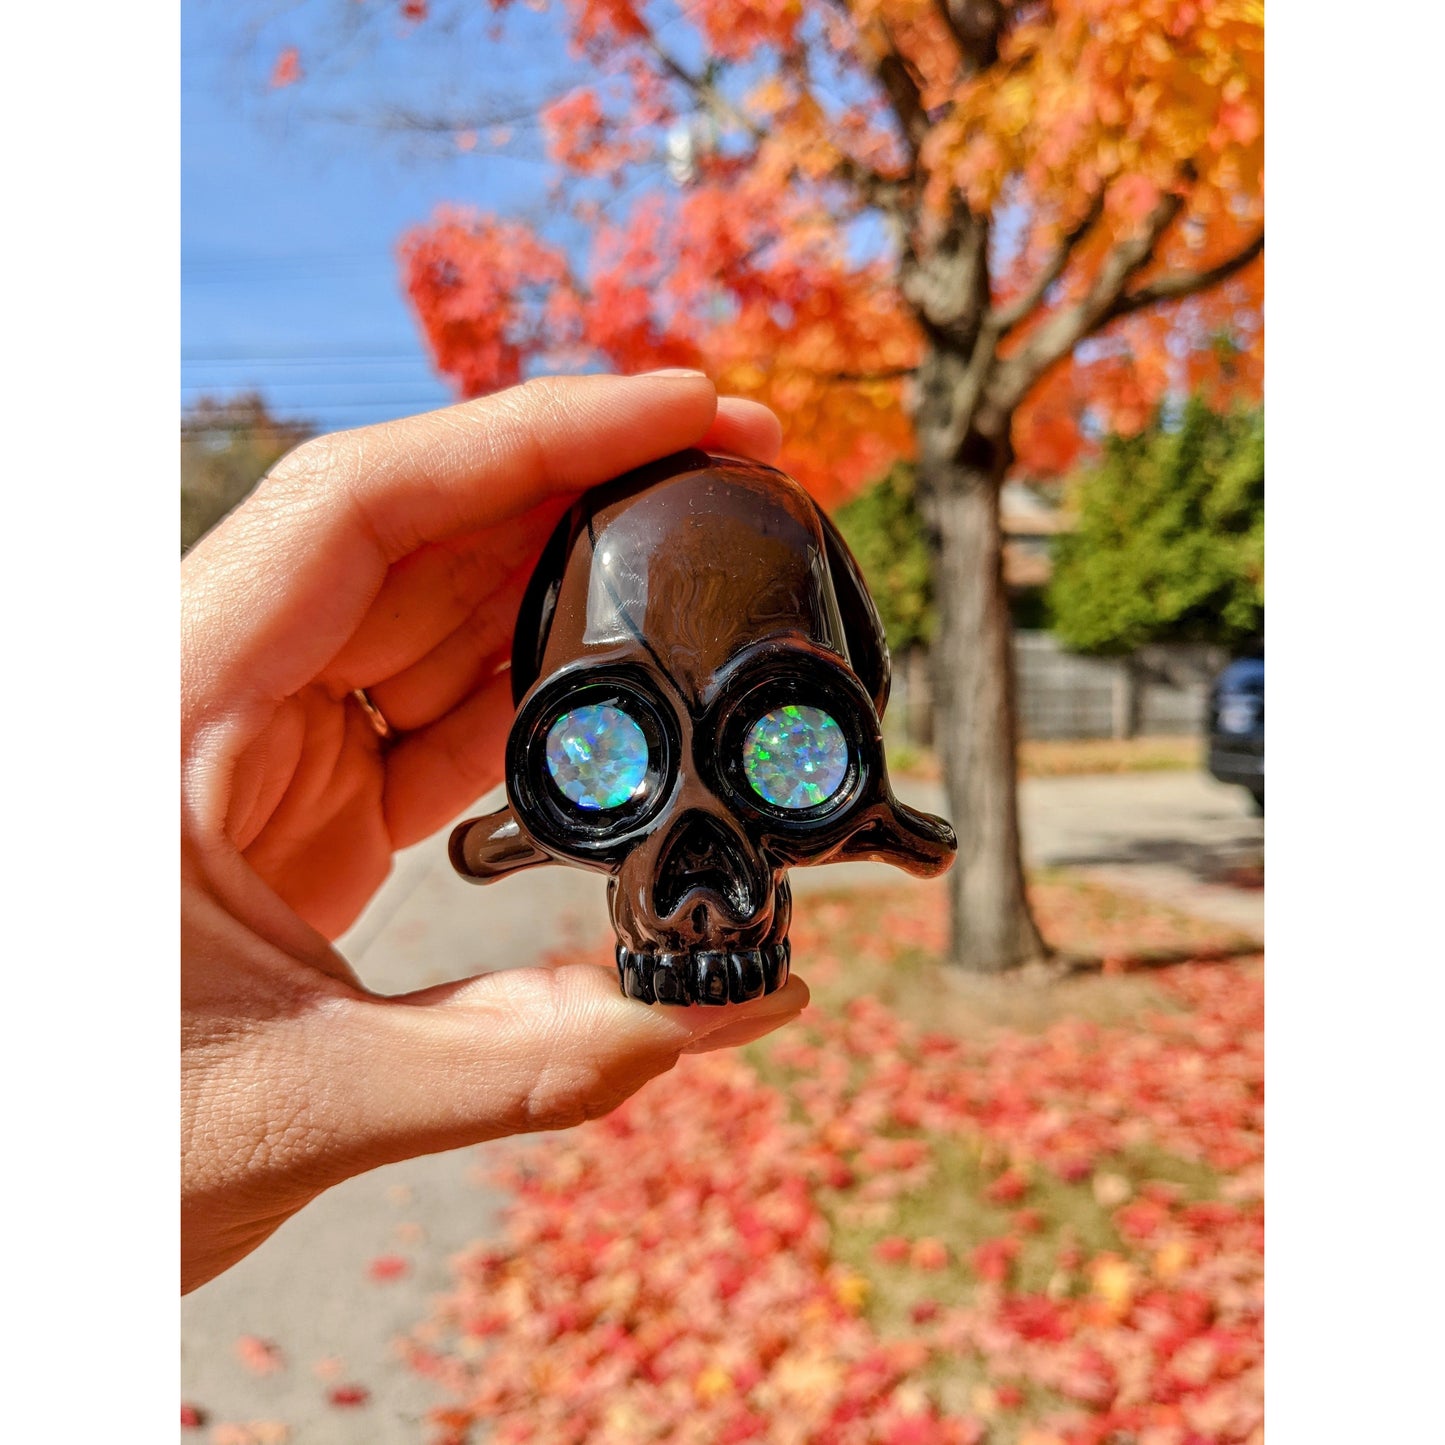 AKM  Skull, 2017 Northstar 144 Grizzly Brown Borosilicate Glass Skull Pendant with Opal Eyes Approx. 2.6 x 2.4 in  Hand blown glass made by AKM. Signed "AKM" + Dated "2017"